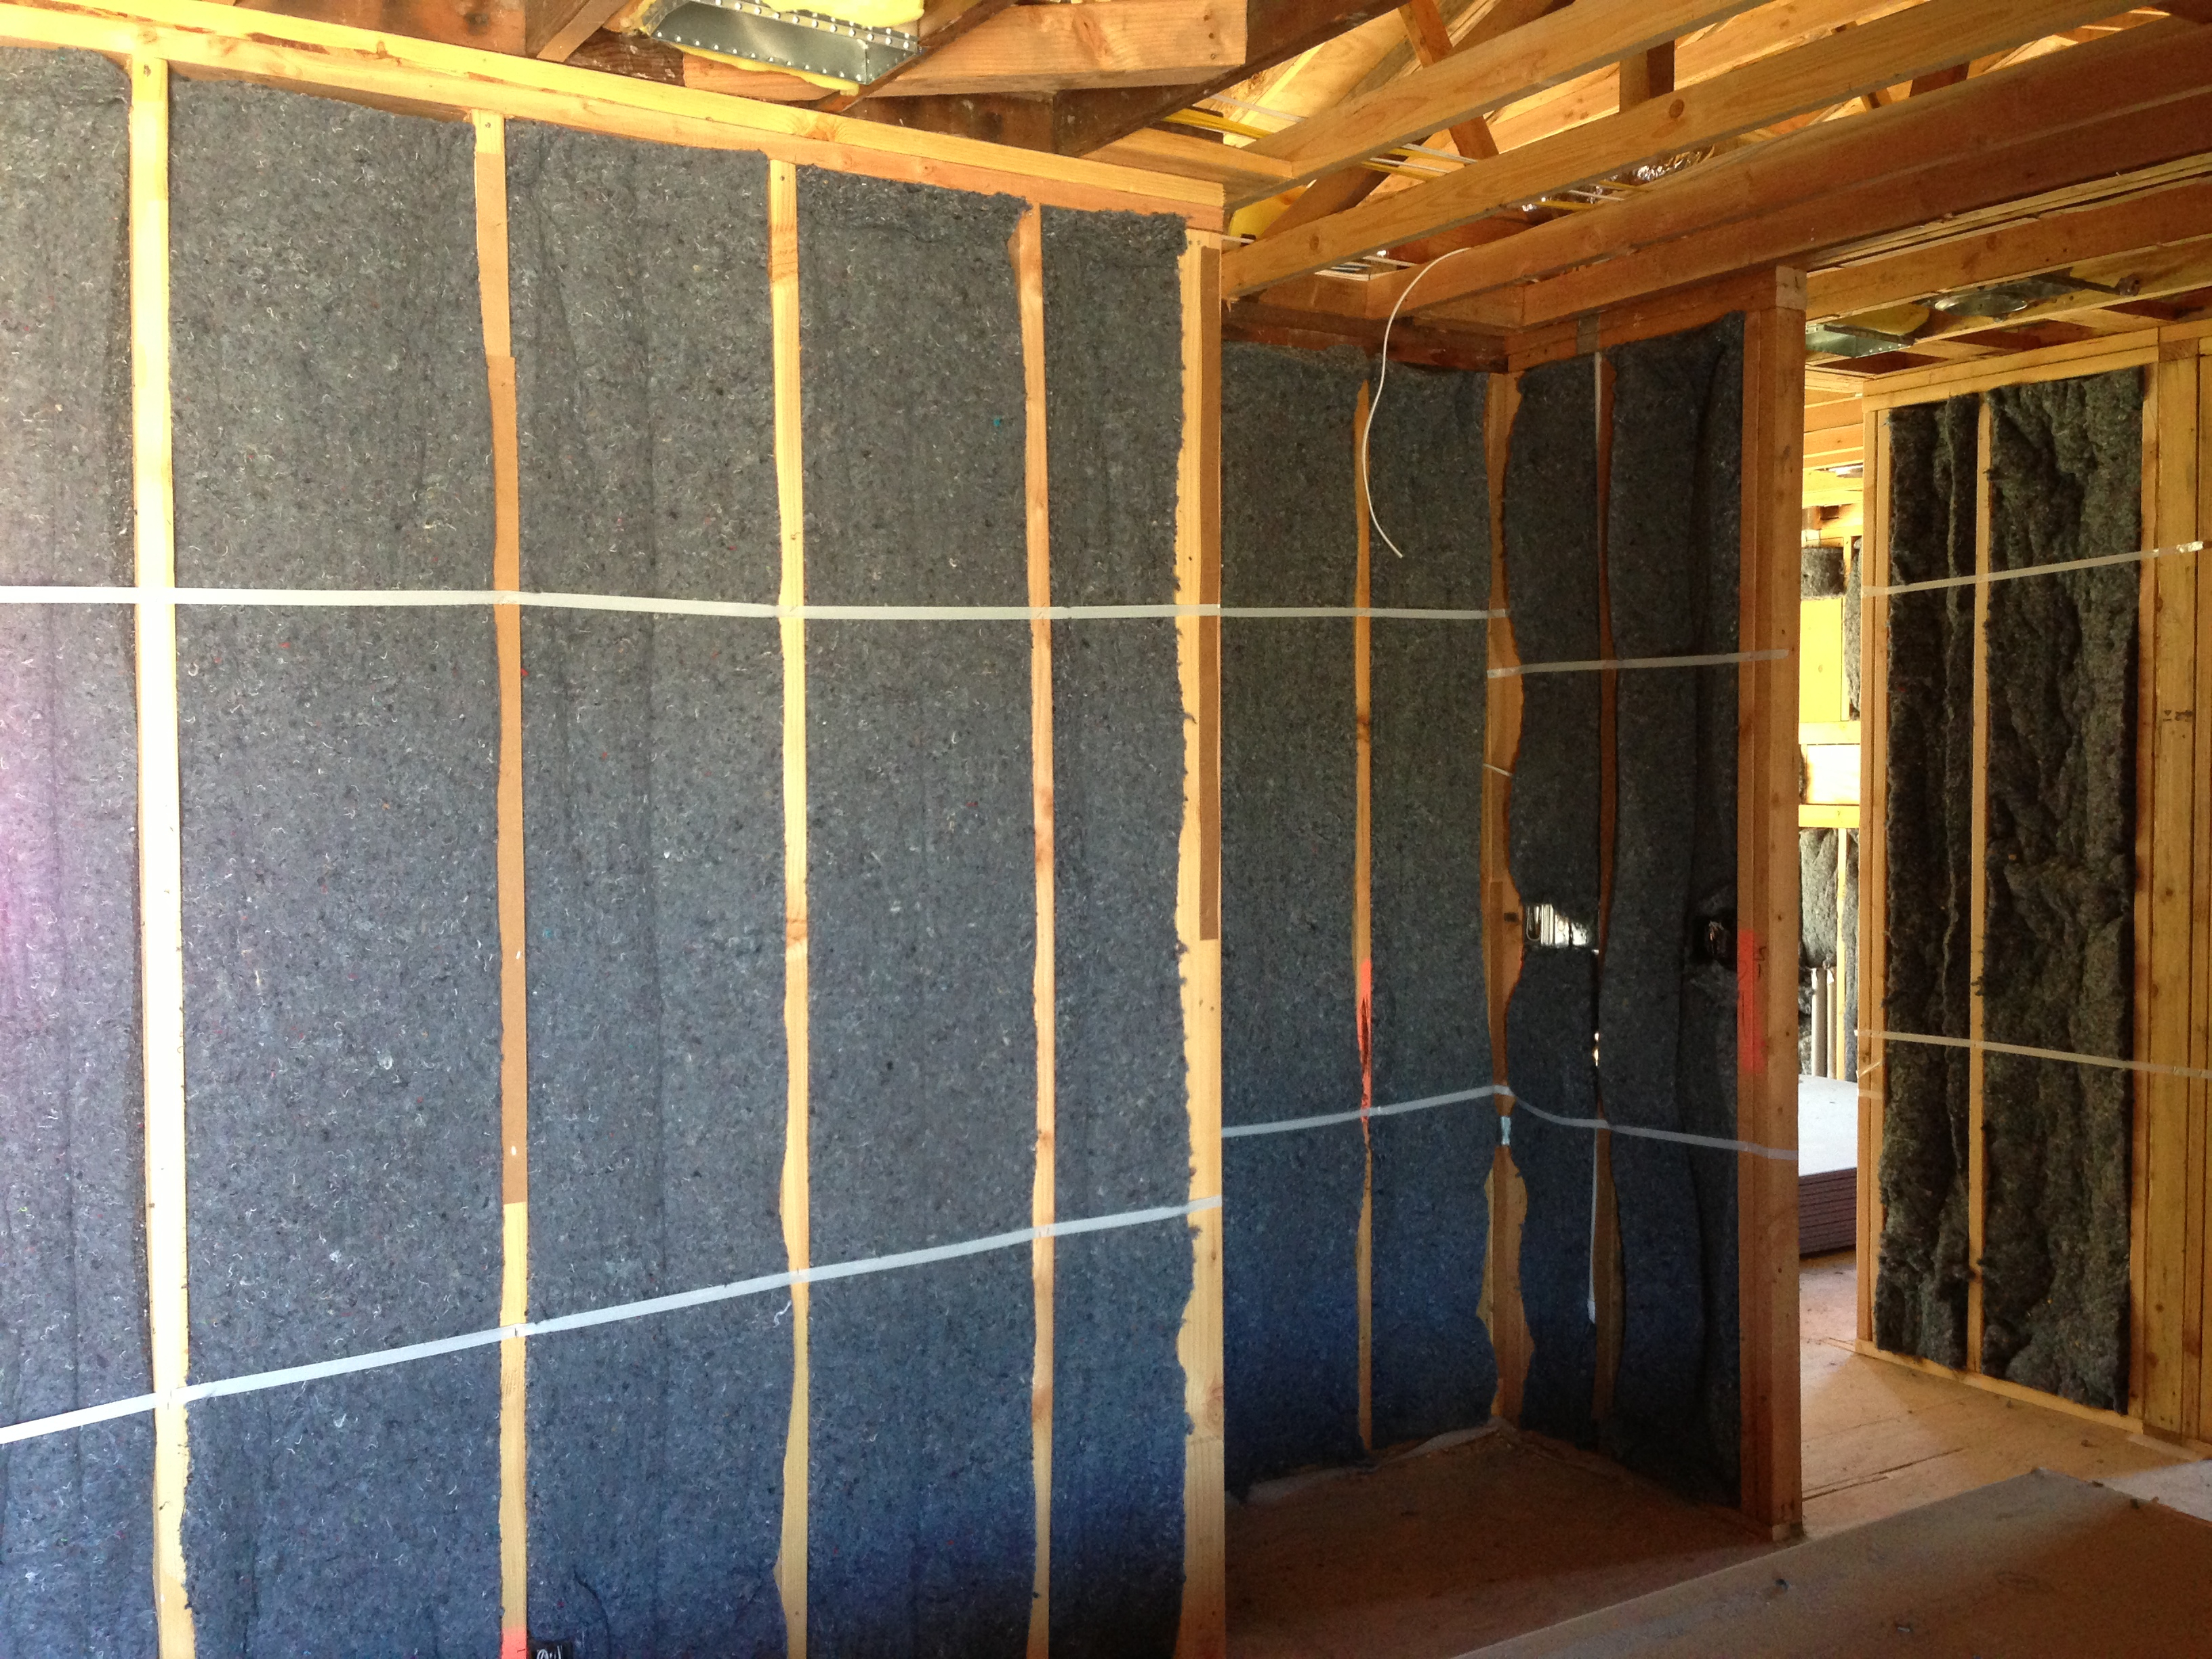 Home insulated with recycled denim - Springwise